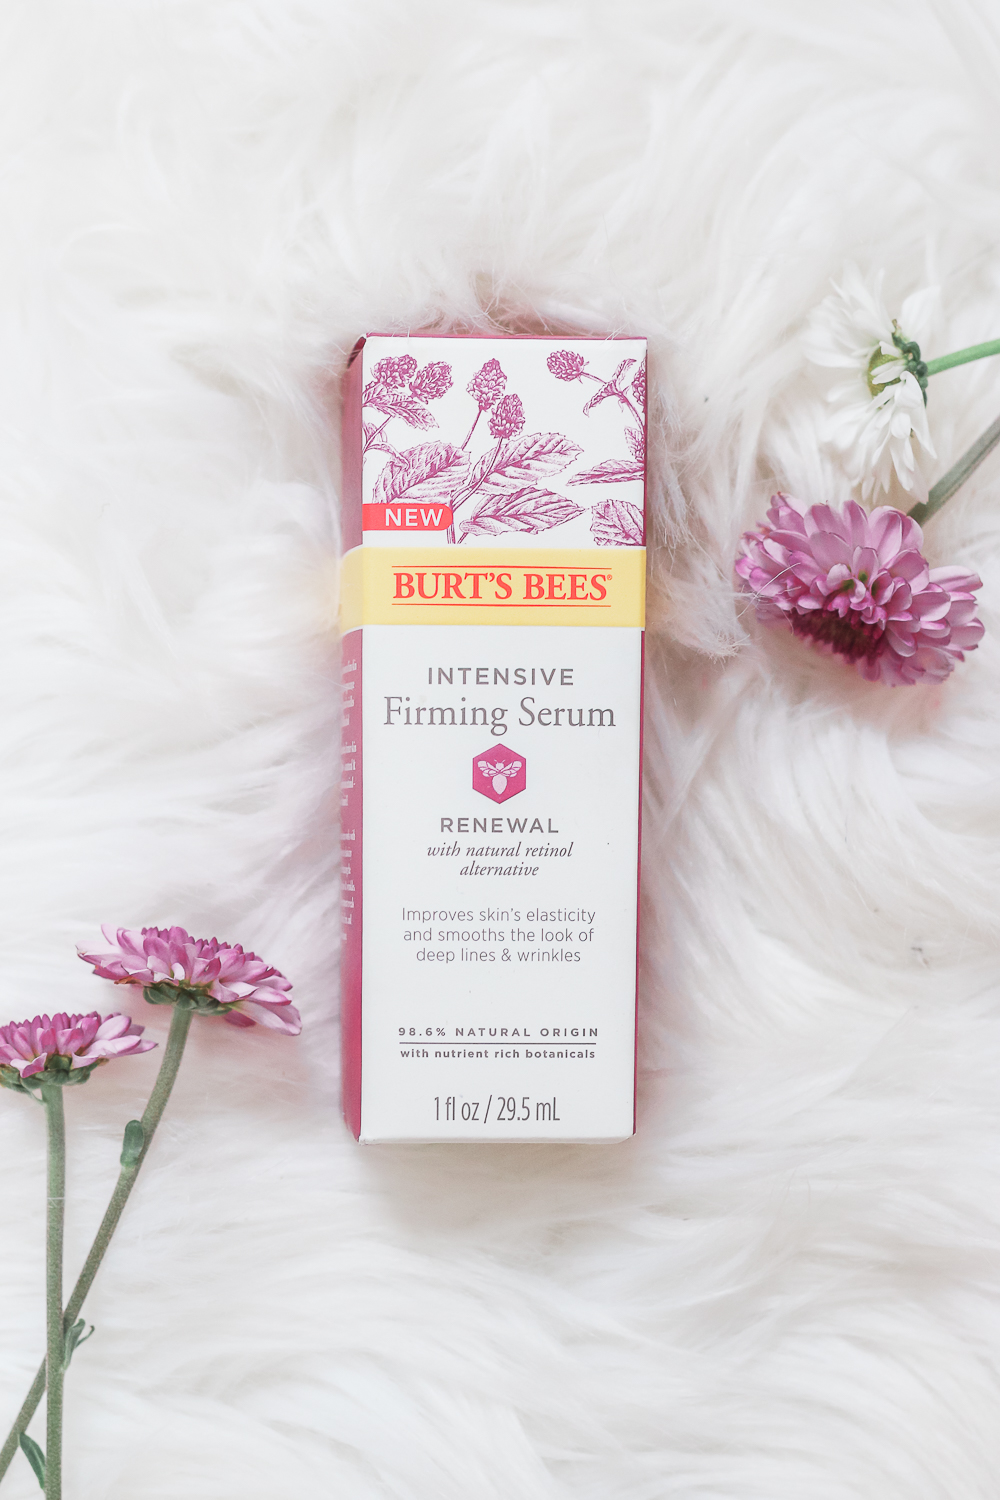 As part of a complete Burt's Bees Renewal skincare review, beauty blogger Stephanie Ziajka shares a Burt's Bees Renewal Firming Serum review on Diary of a Debutante